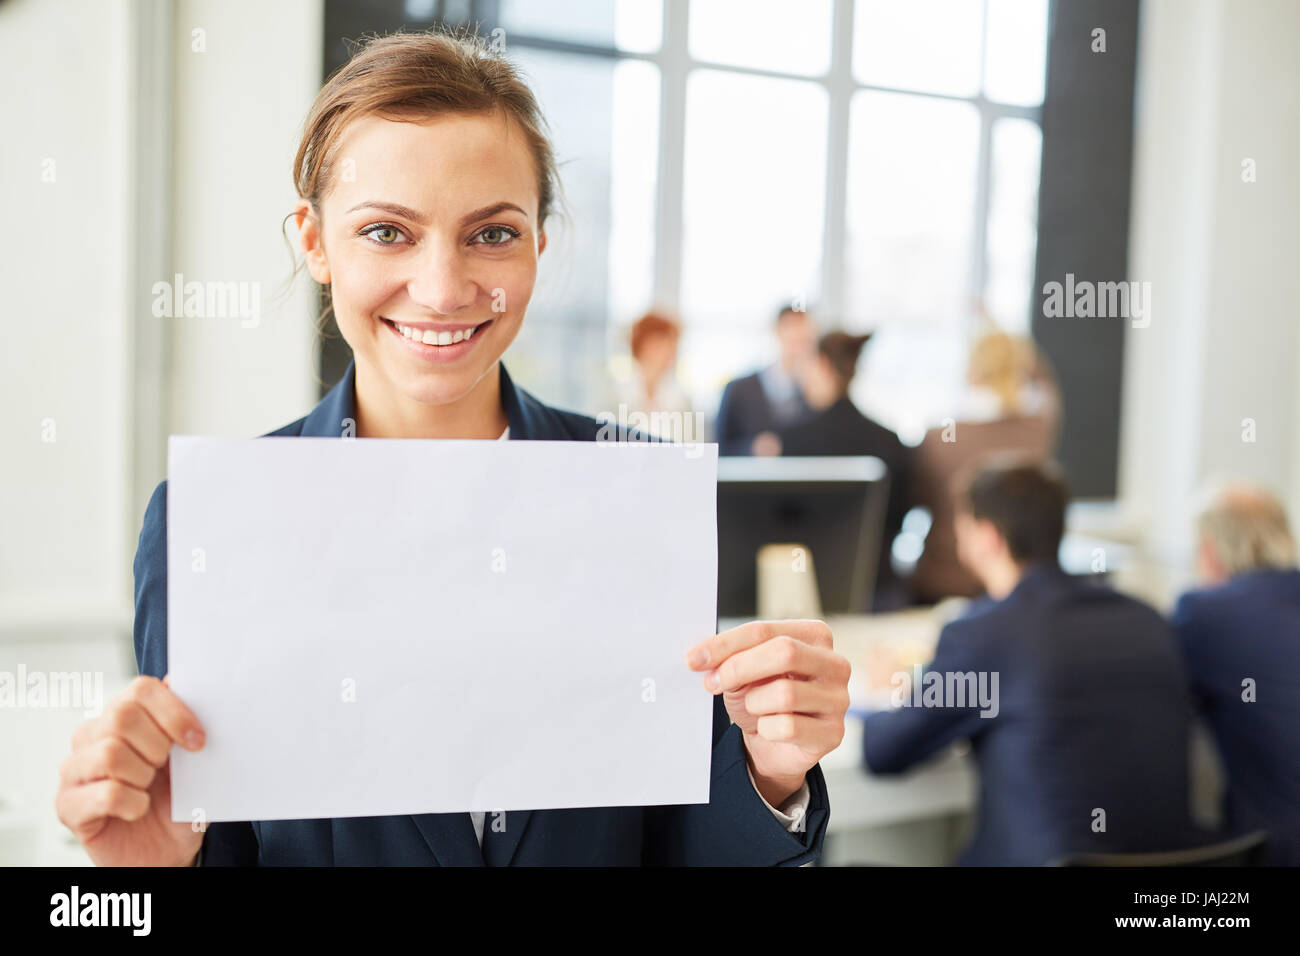 Happy woman smiling holds blank sign in business office Stock Photo